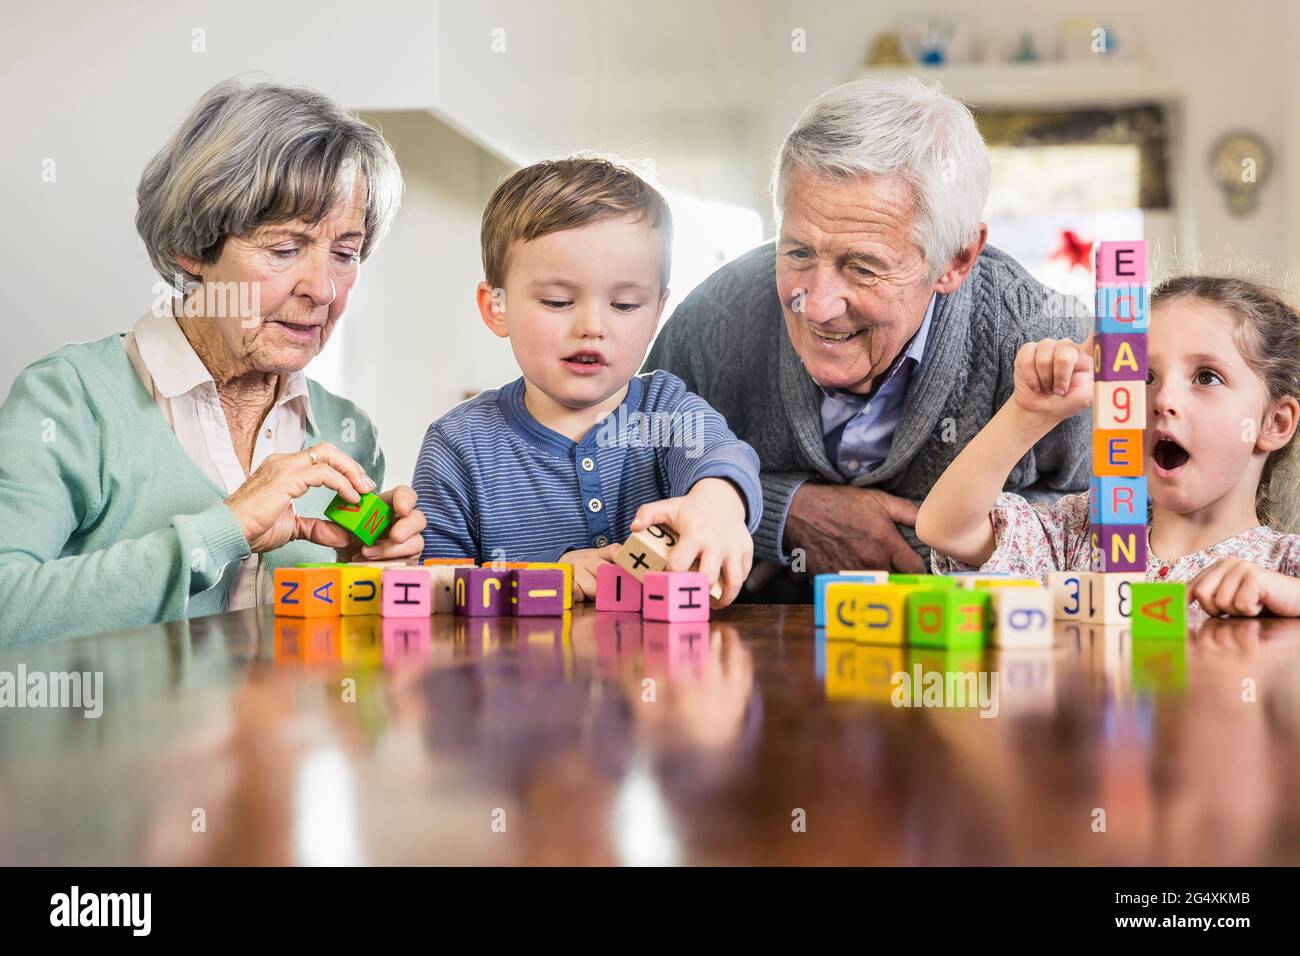 Children playing with toy blocks by grandparent at home Stock Photo